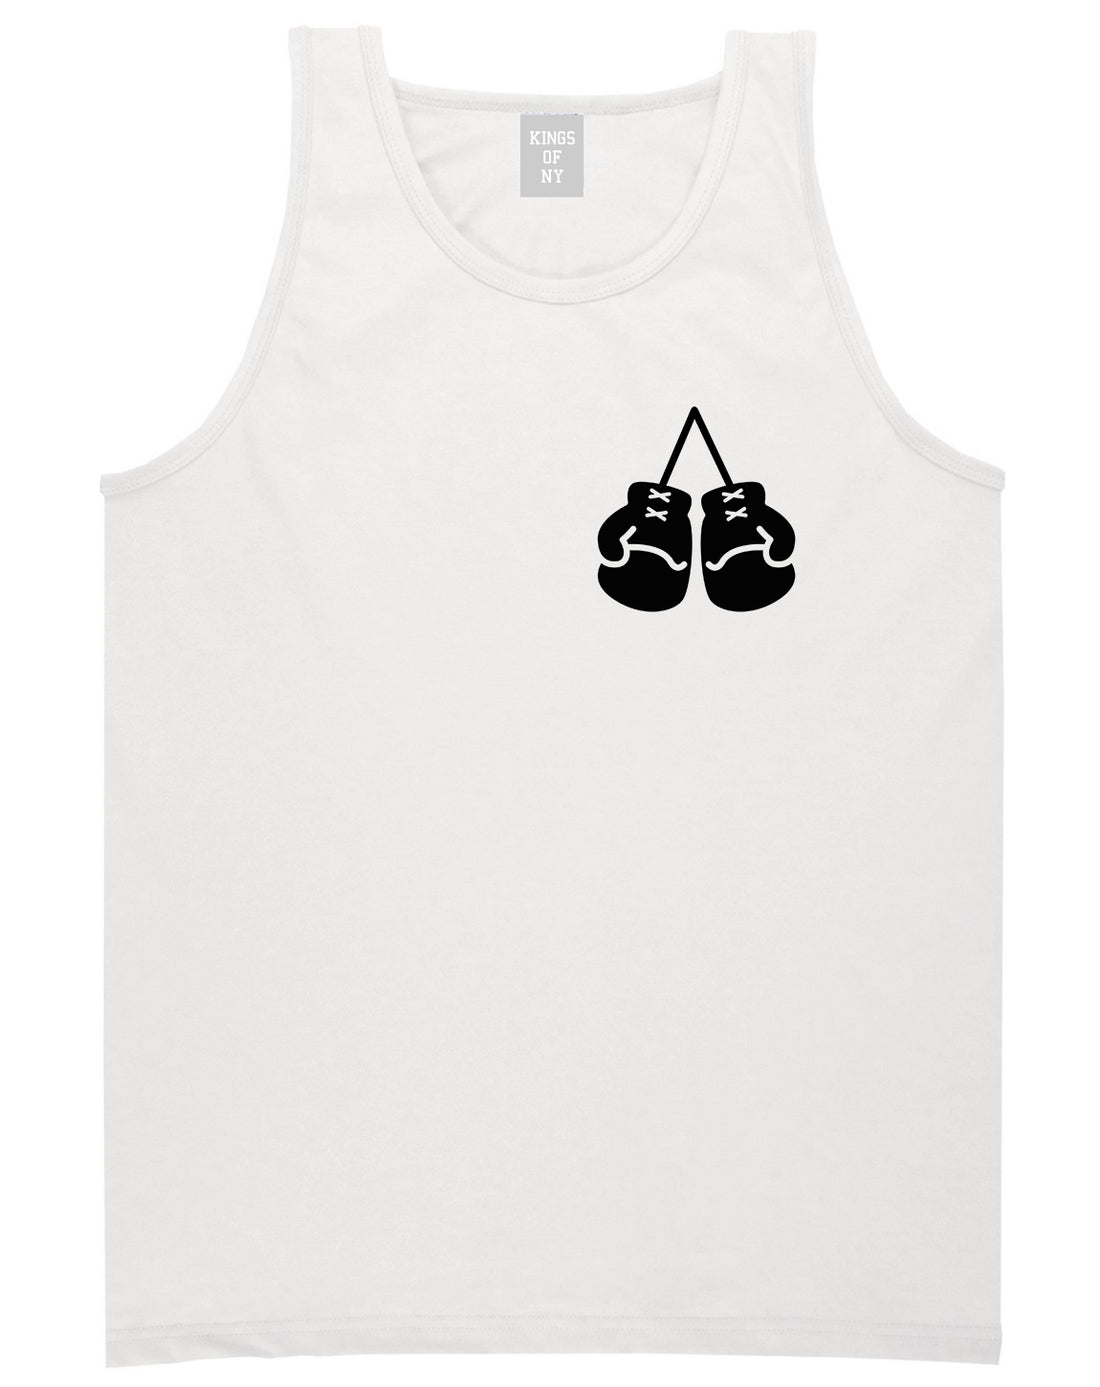 Boxing Gloves Chest White Tank Top Shirt by Kings Of NY